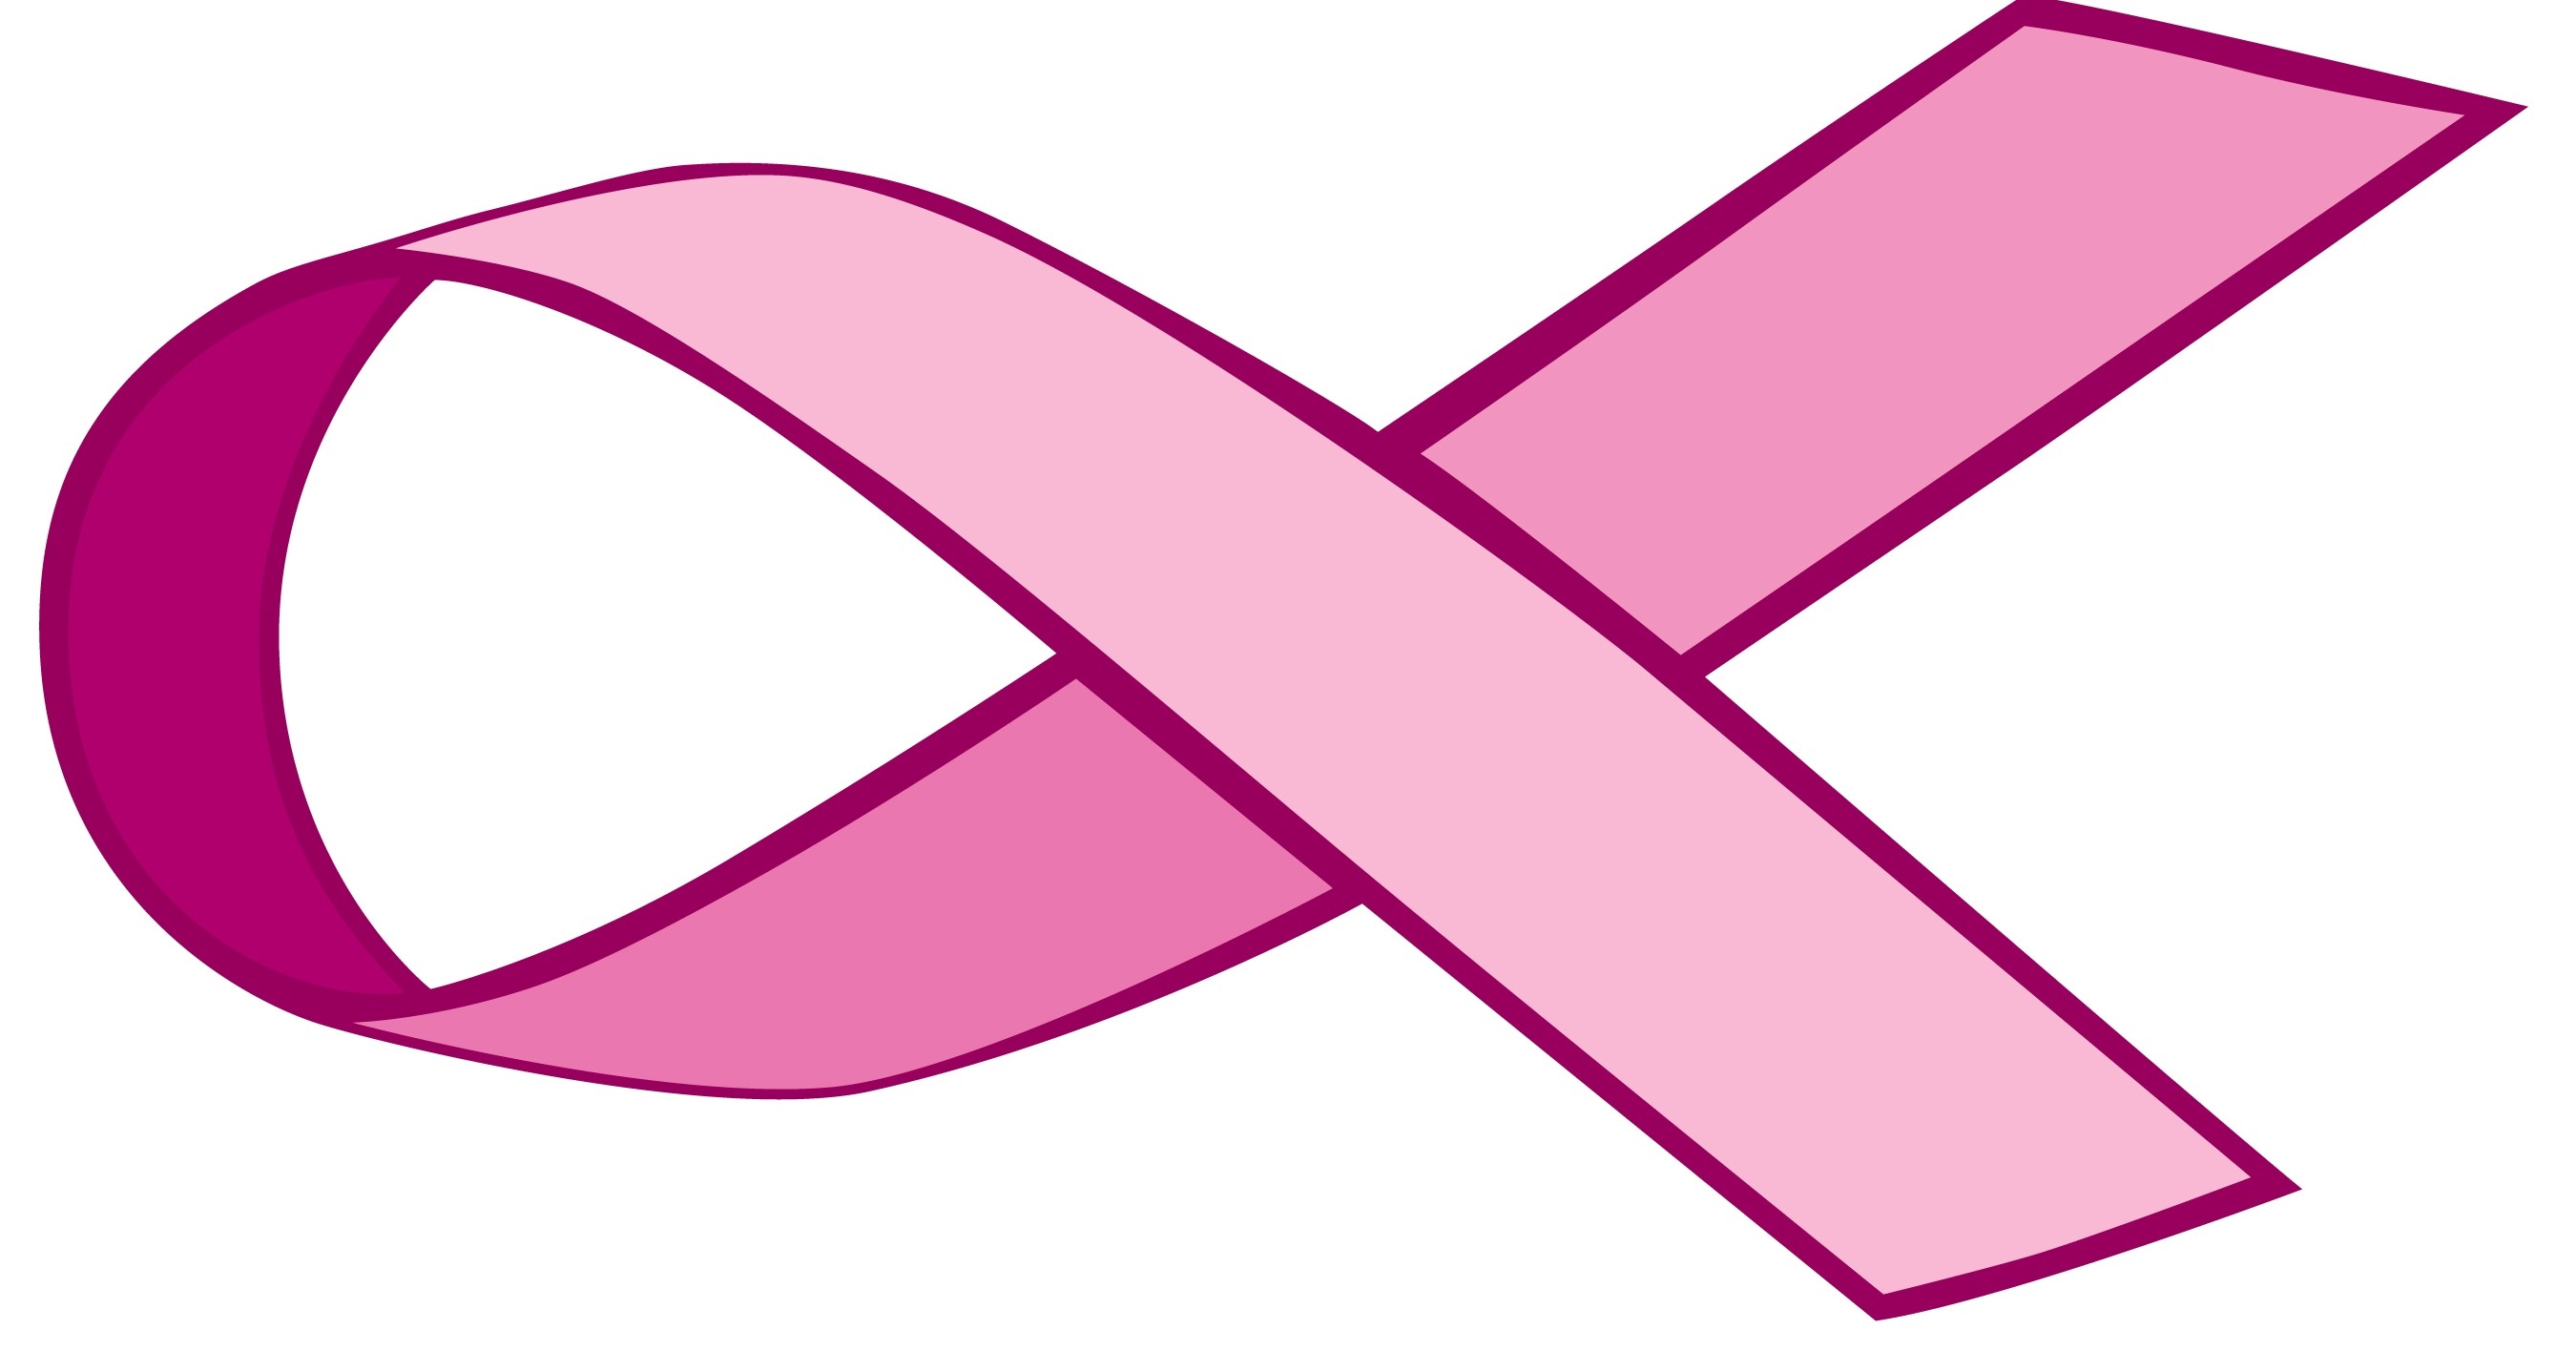 Pink Cancer Ribbon Images - ClipArt Best